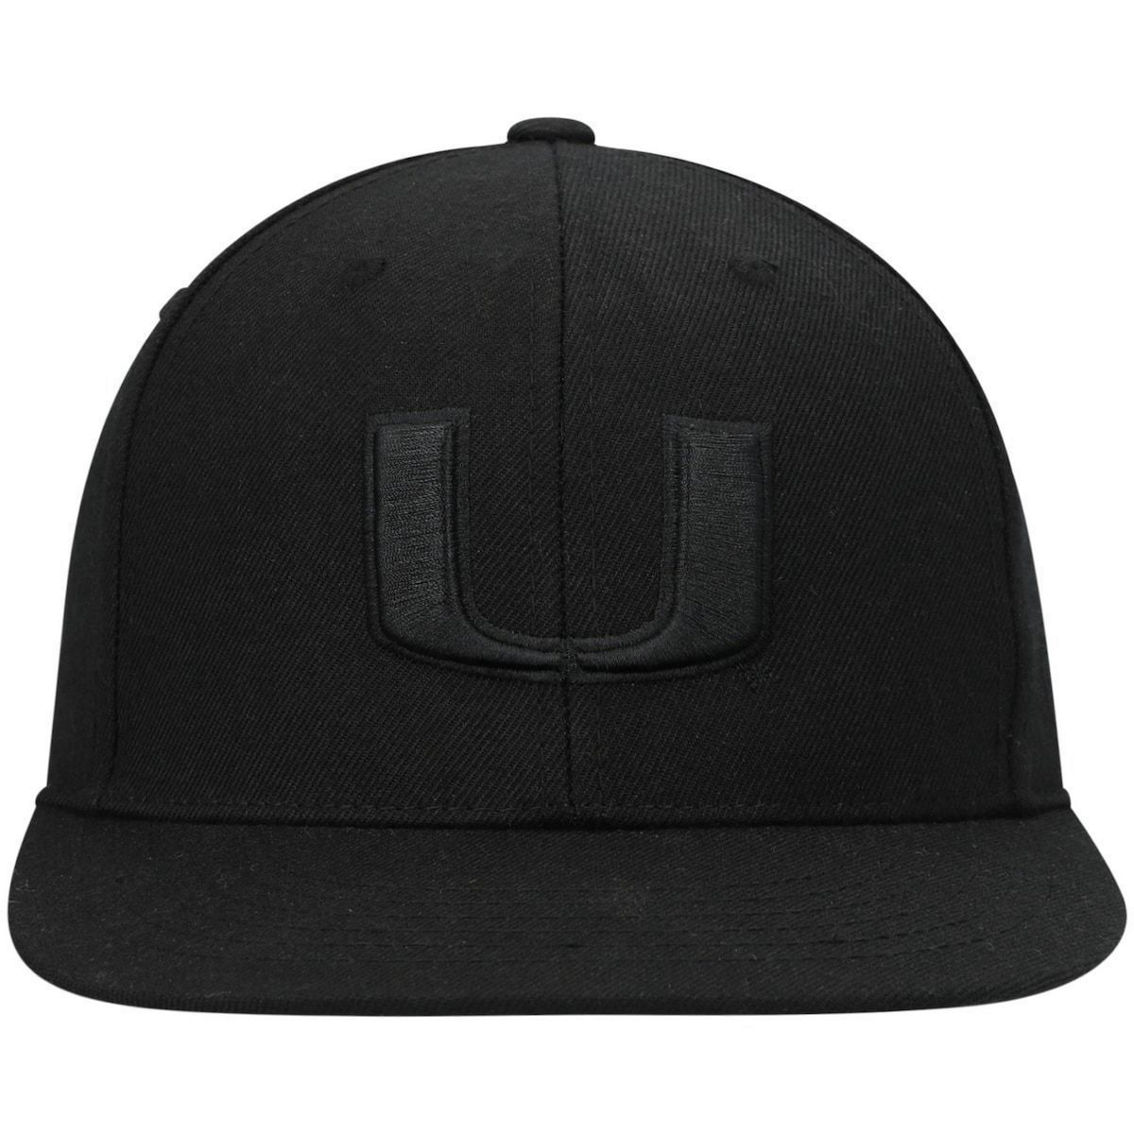 Top of the World Men's Miami Hurricanes Black On Black Fitted Hat - Image 3 of 4